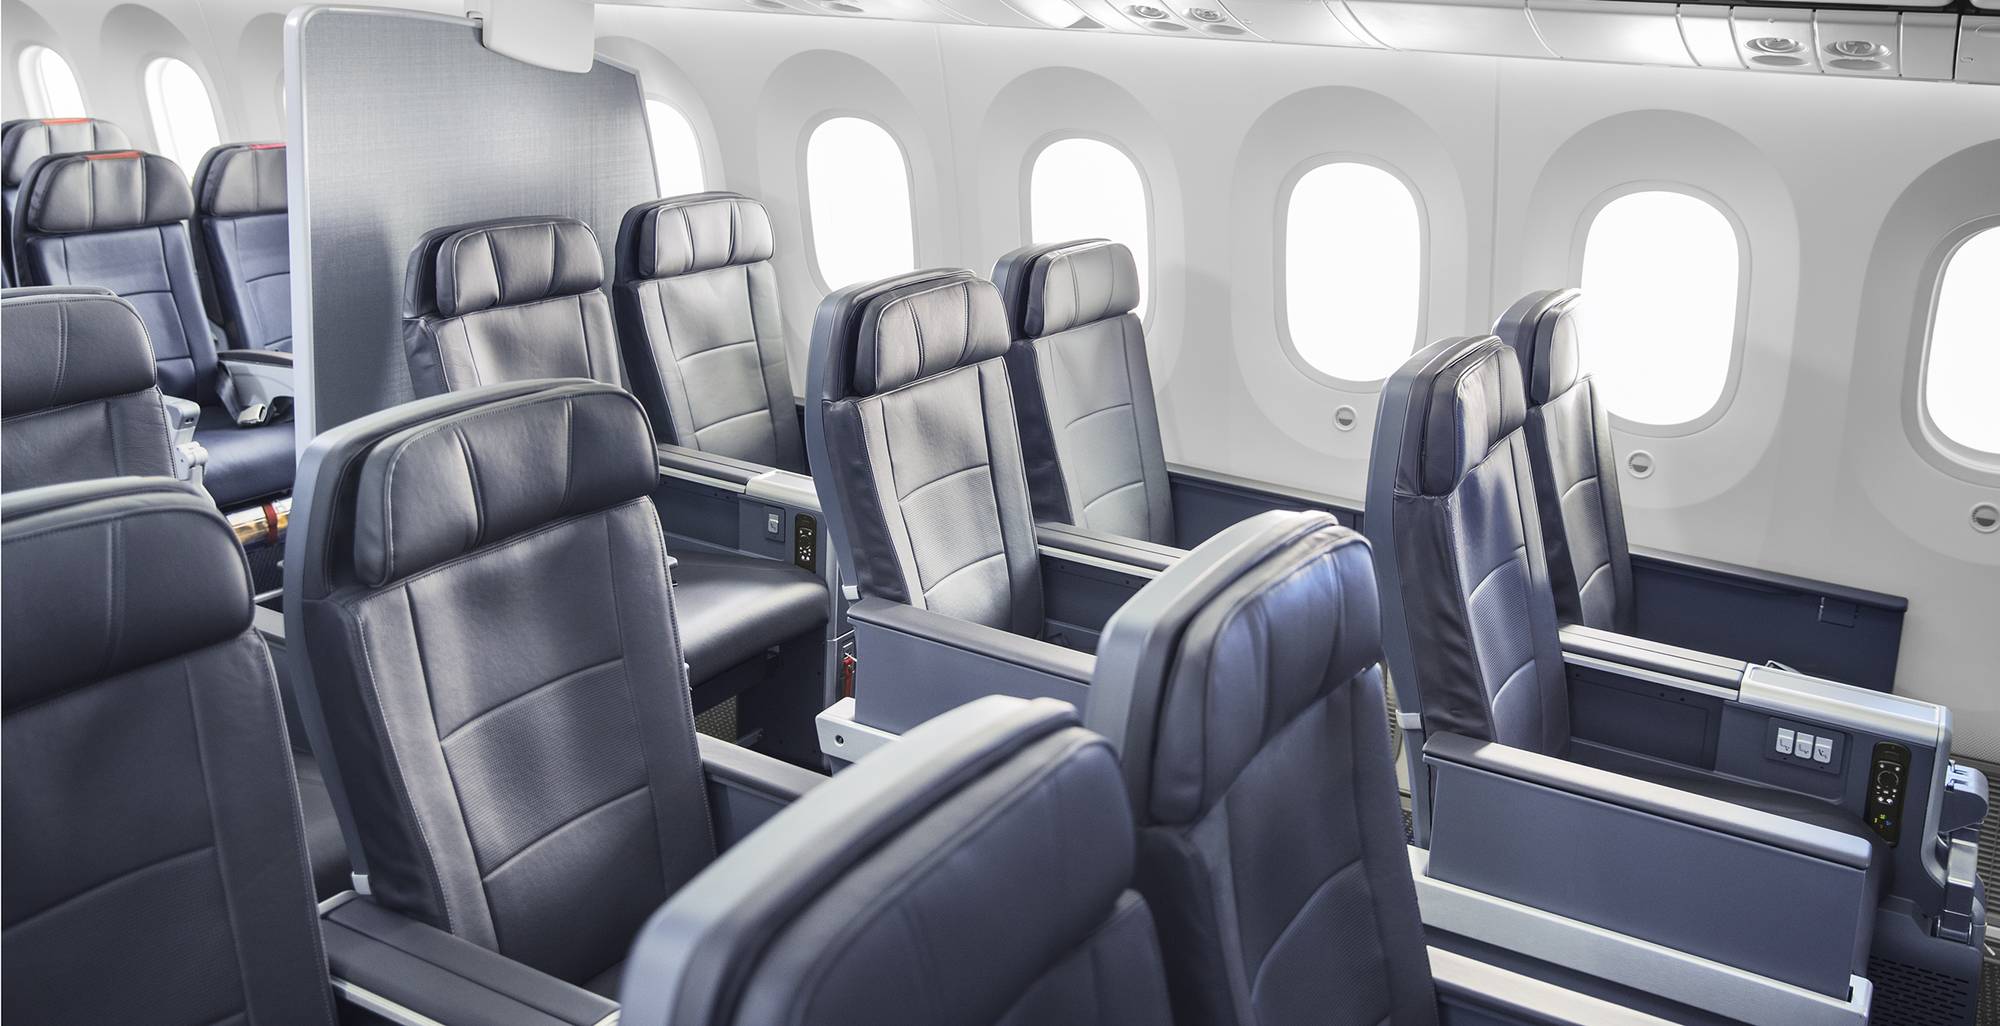 American Airlines discontinuing most exclusive first-class section to  prioritize business class